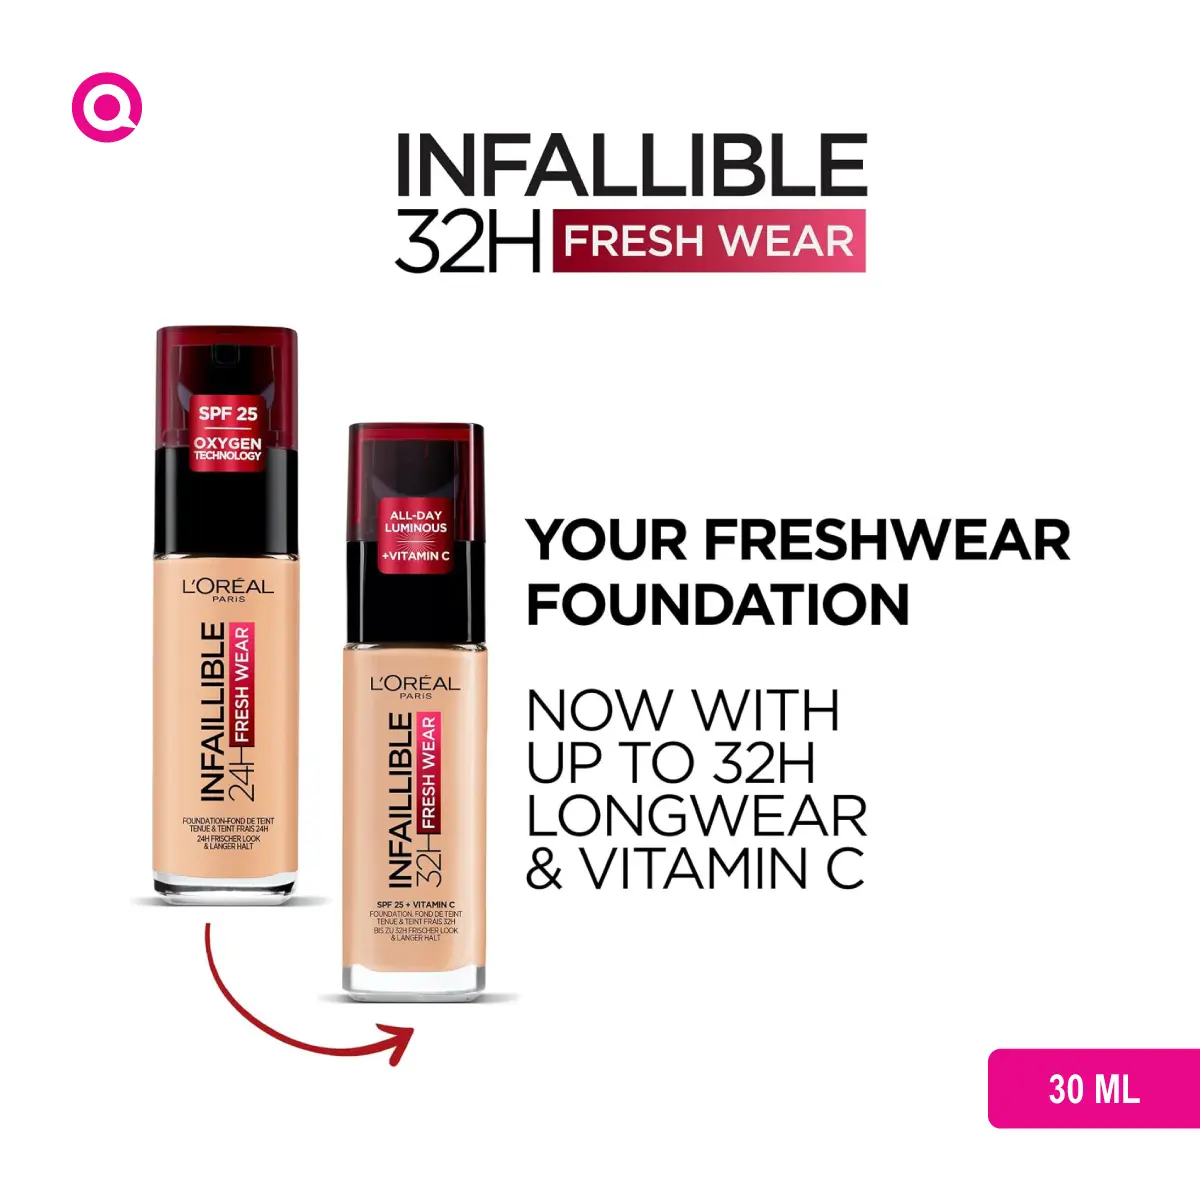 L'Oreal Infaillible 32H Fresh Wear Foundation - 20 IVORY-02